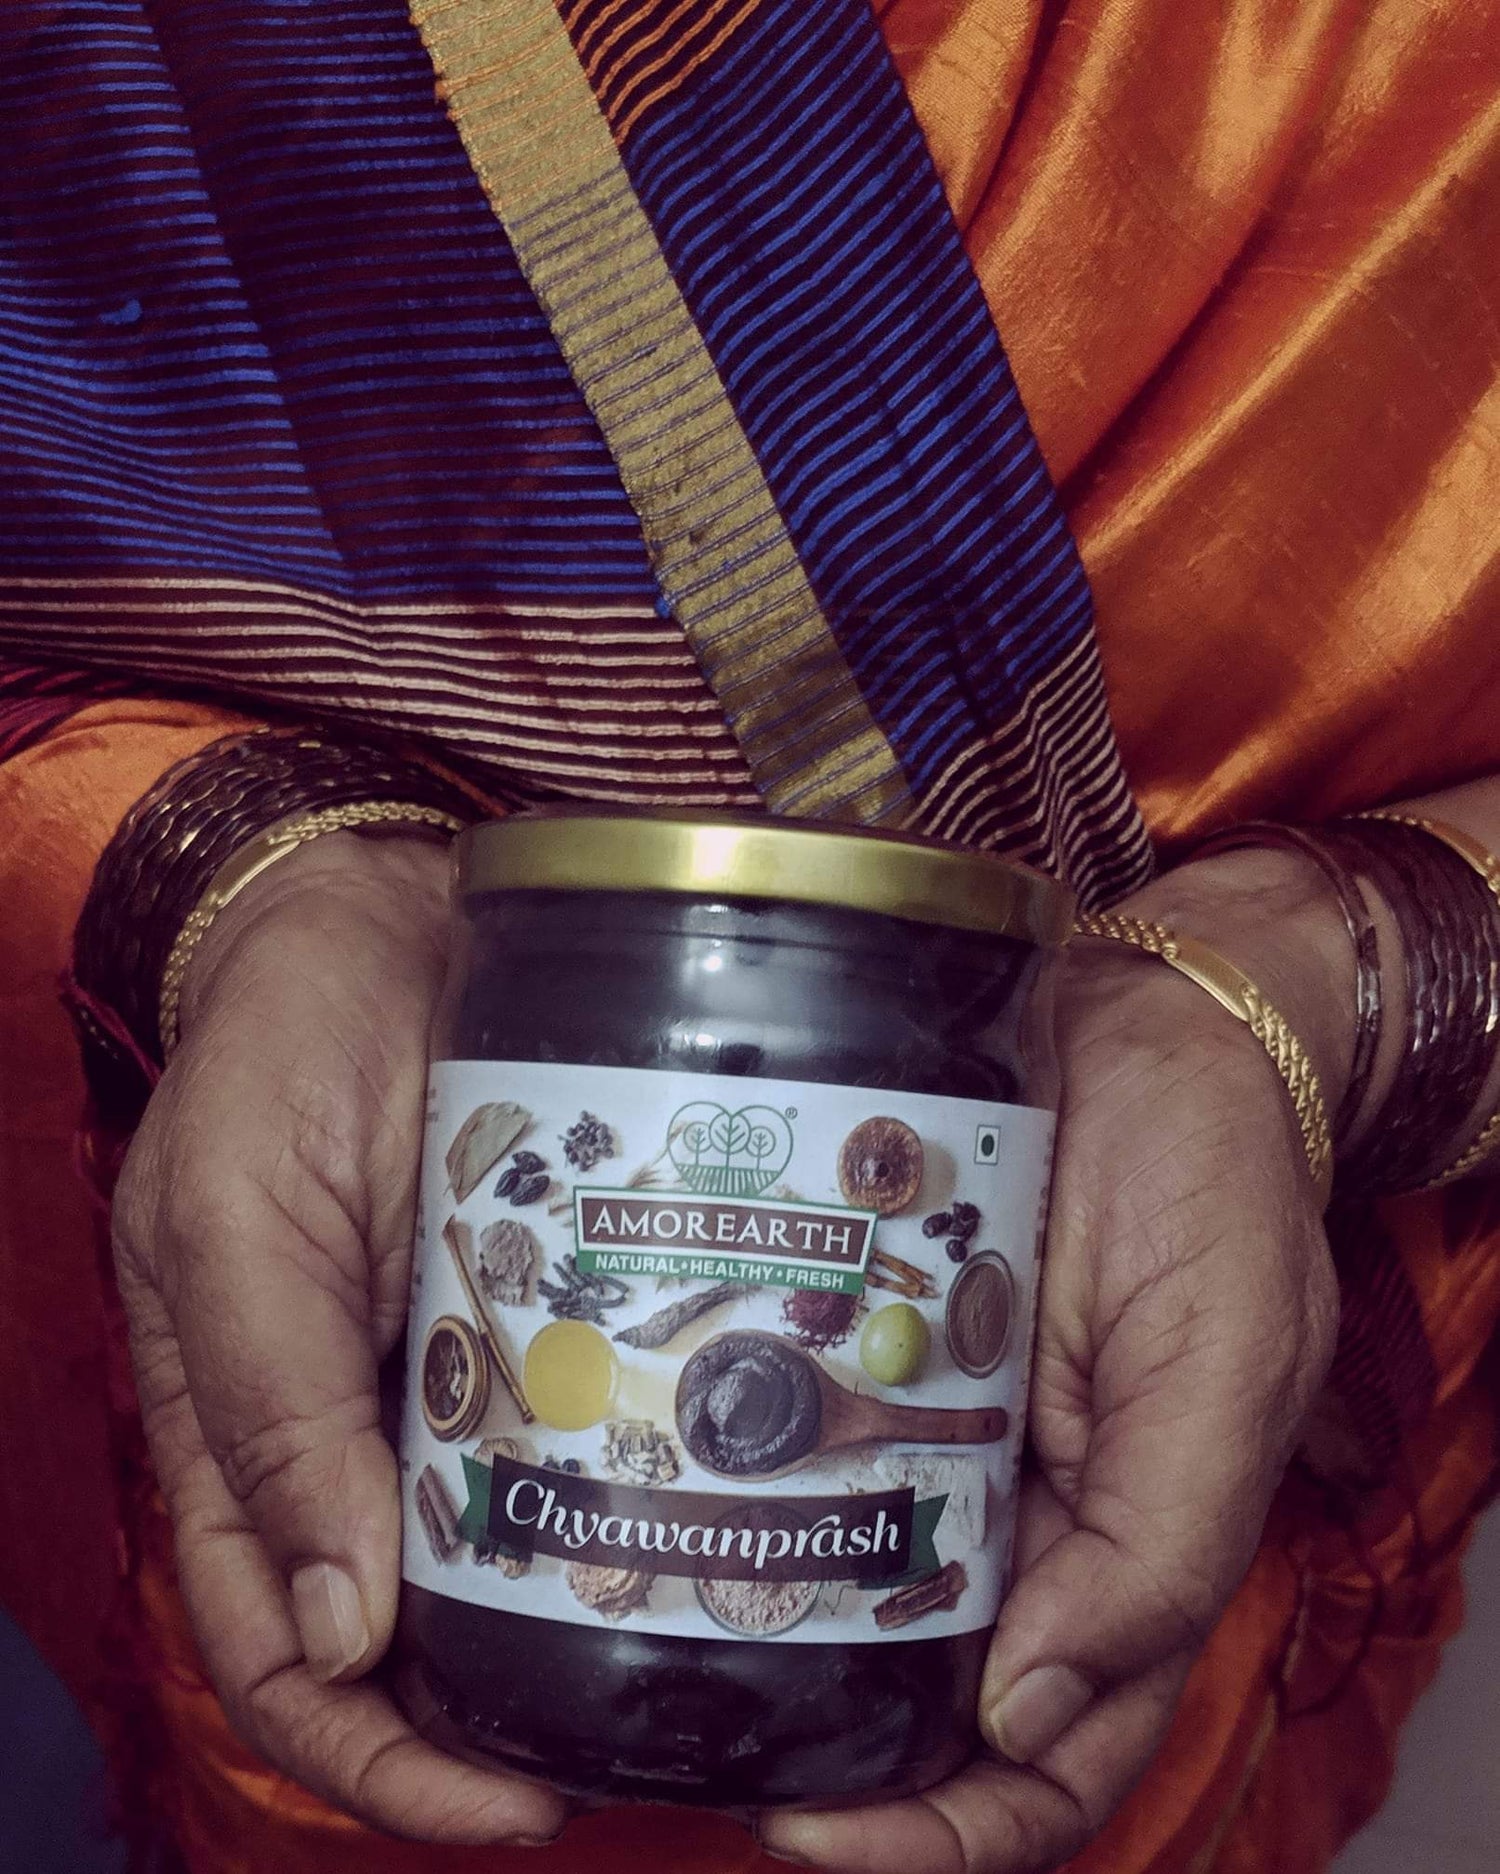 Women holding a jar of Limited Edition Amlaprash made by Two Brothers Organic Farms